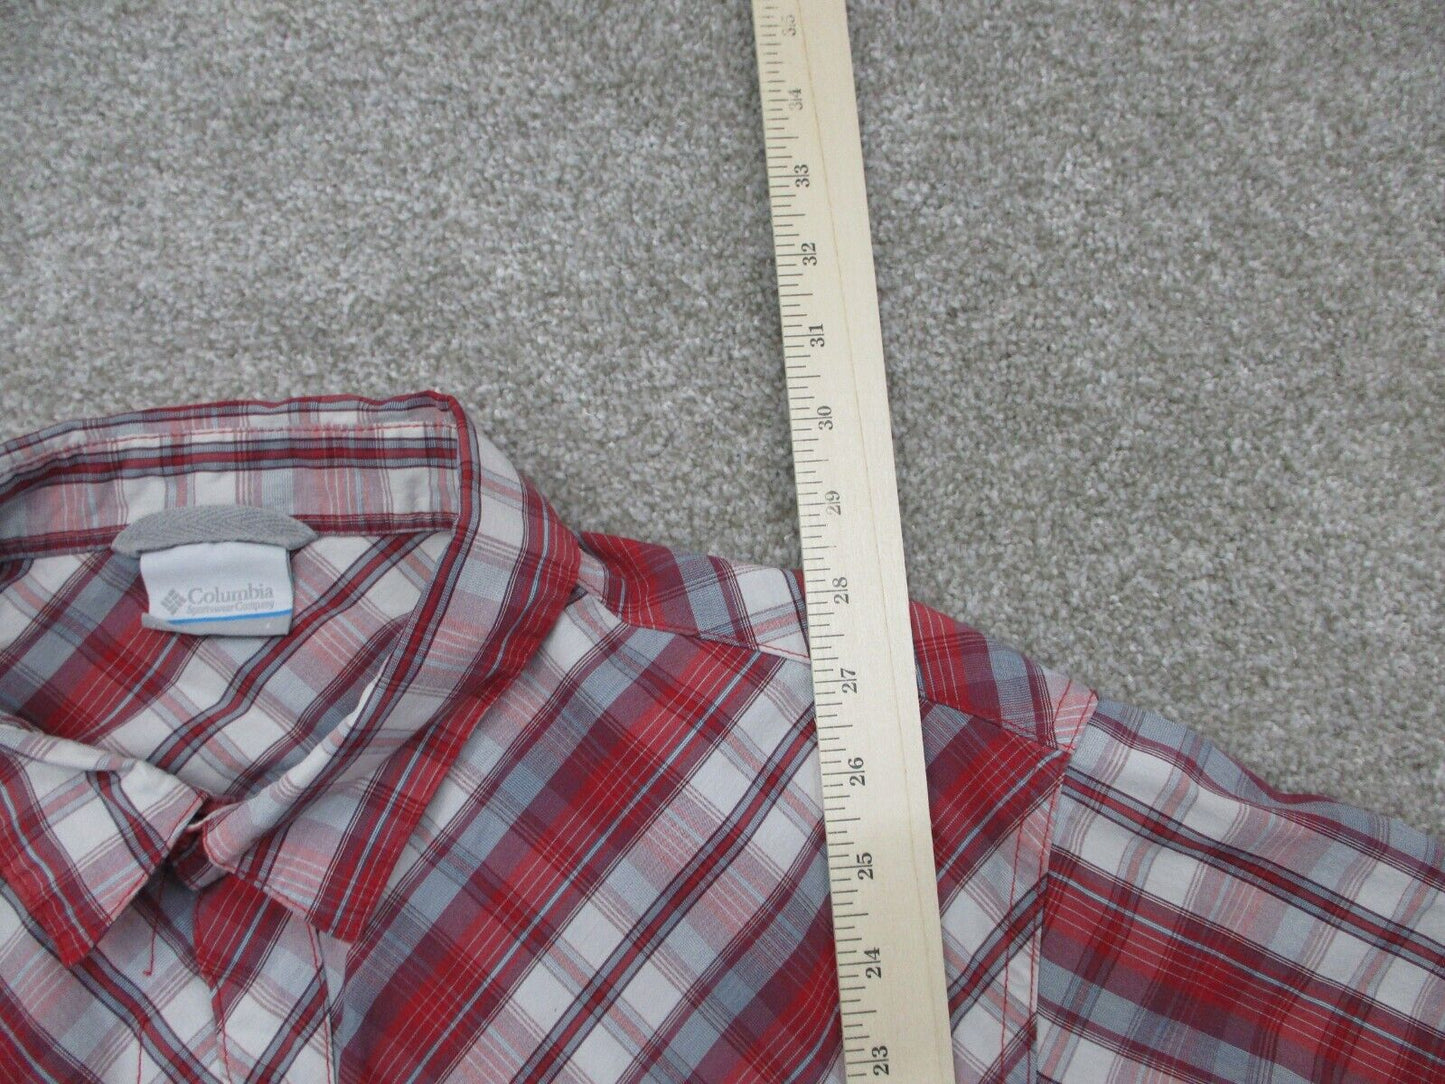 Columbia Button Up Shirt Mens Large Multicolor Plaid Short Sleeves Classic Fit